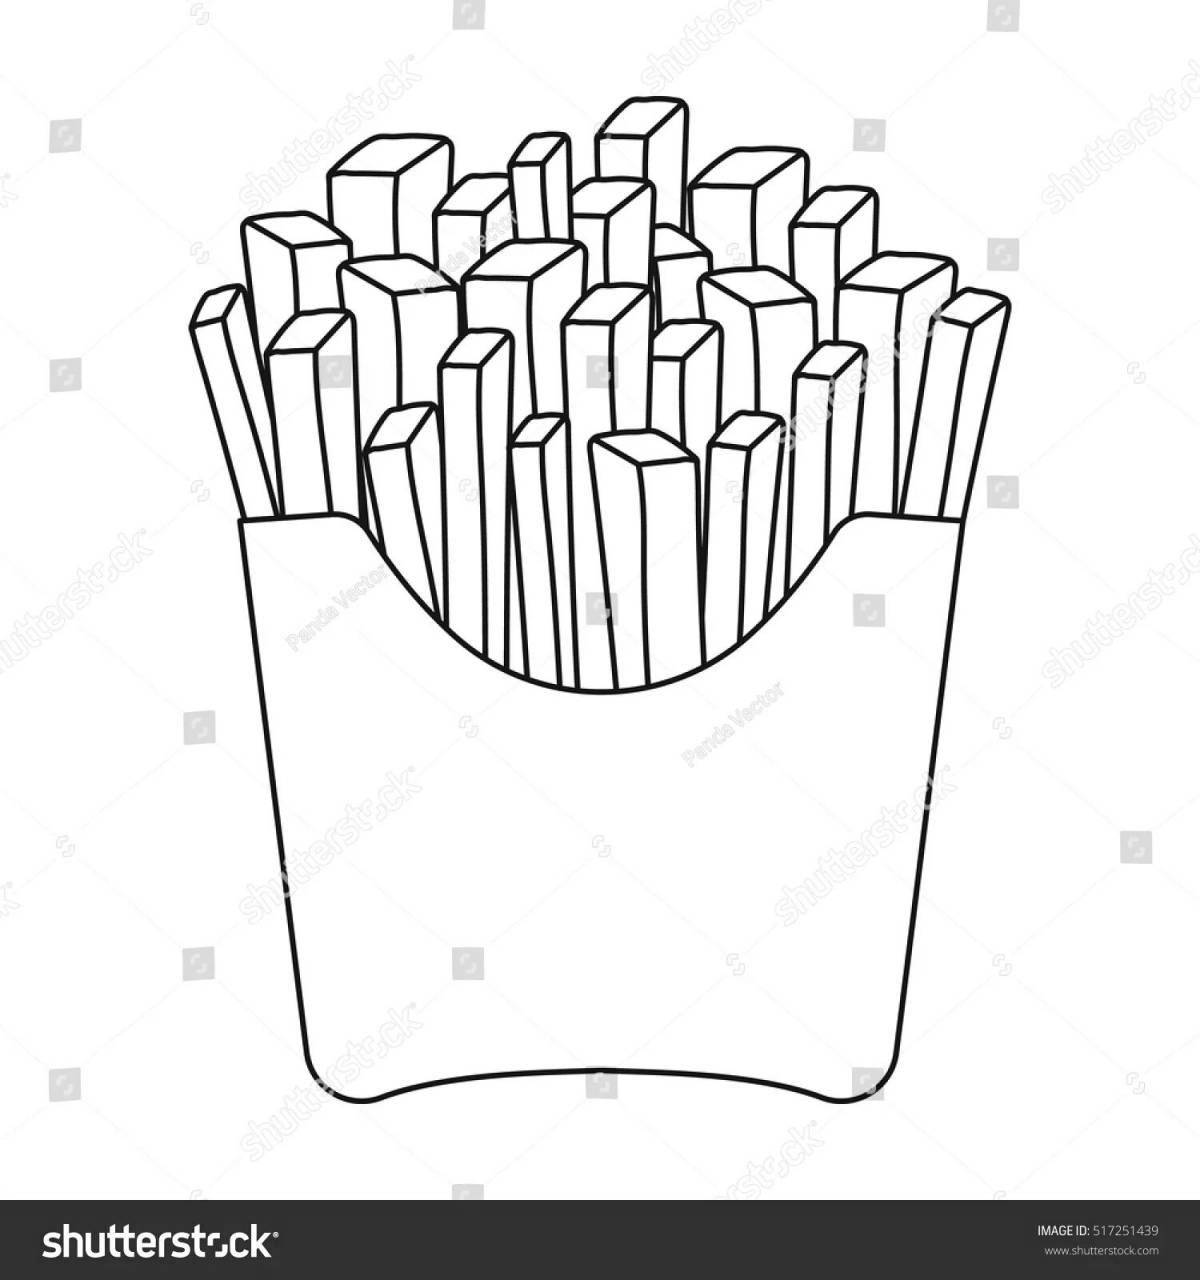 Fun coloring french fries for kids